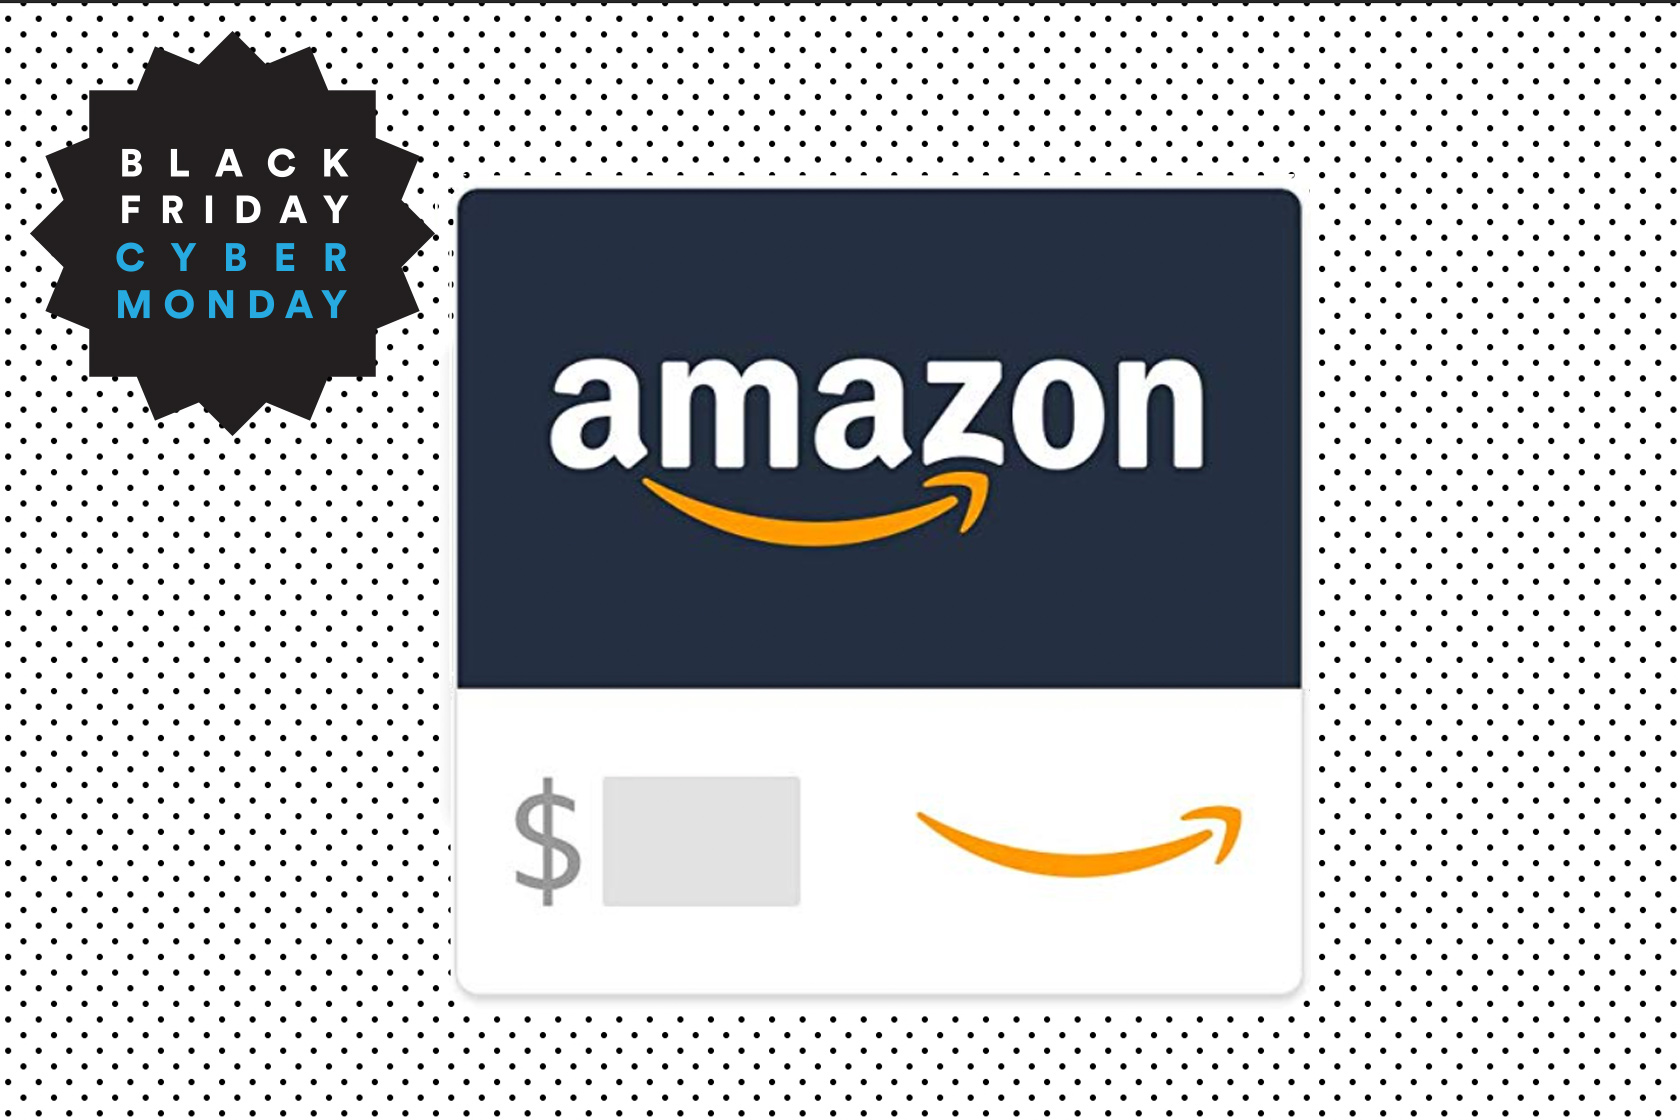 Offer for an Amazon Gift Card in Exchange for Review - Truth in Advertising